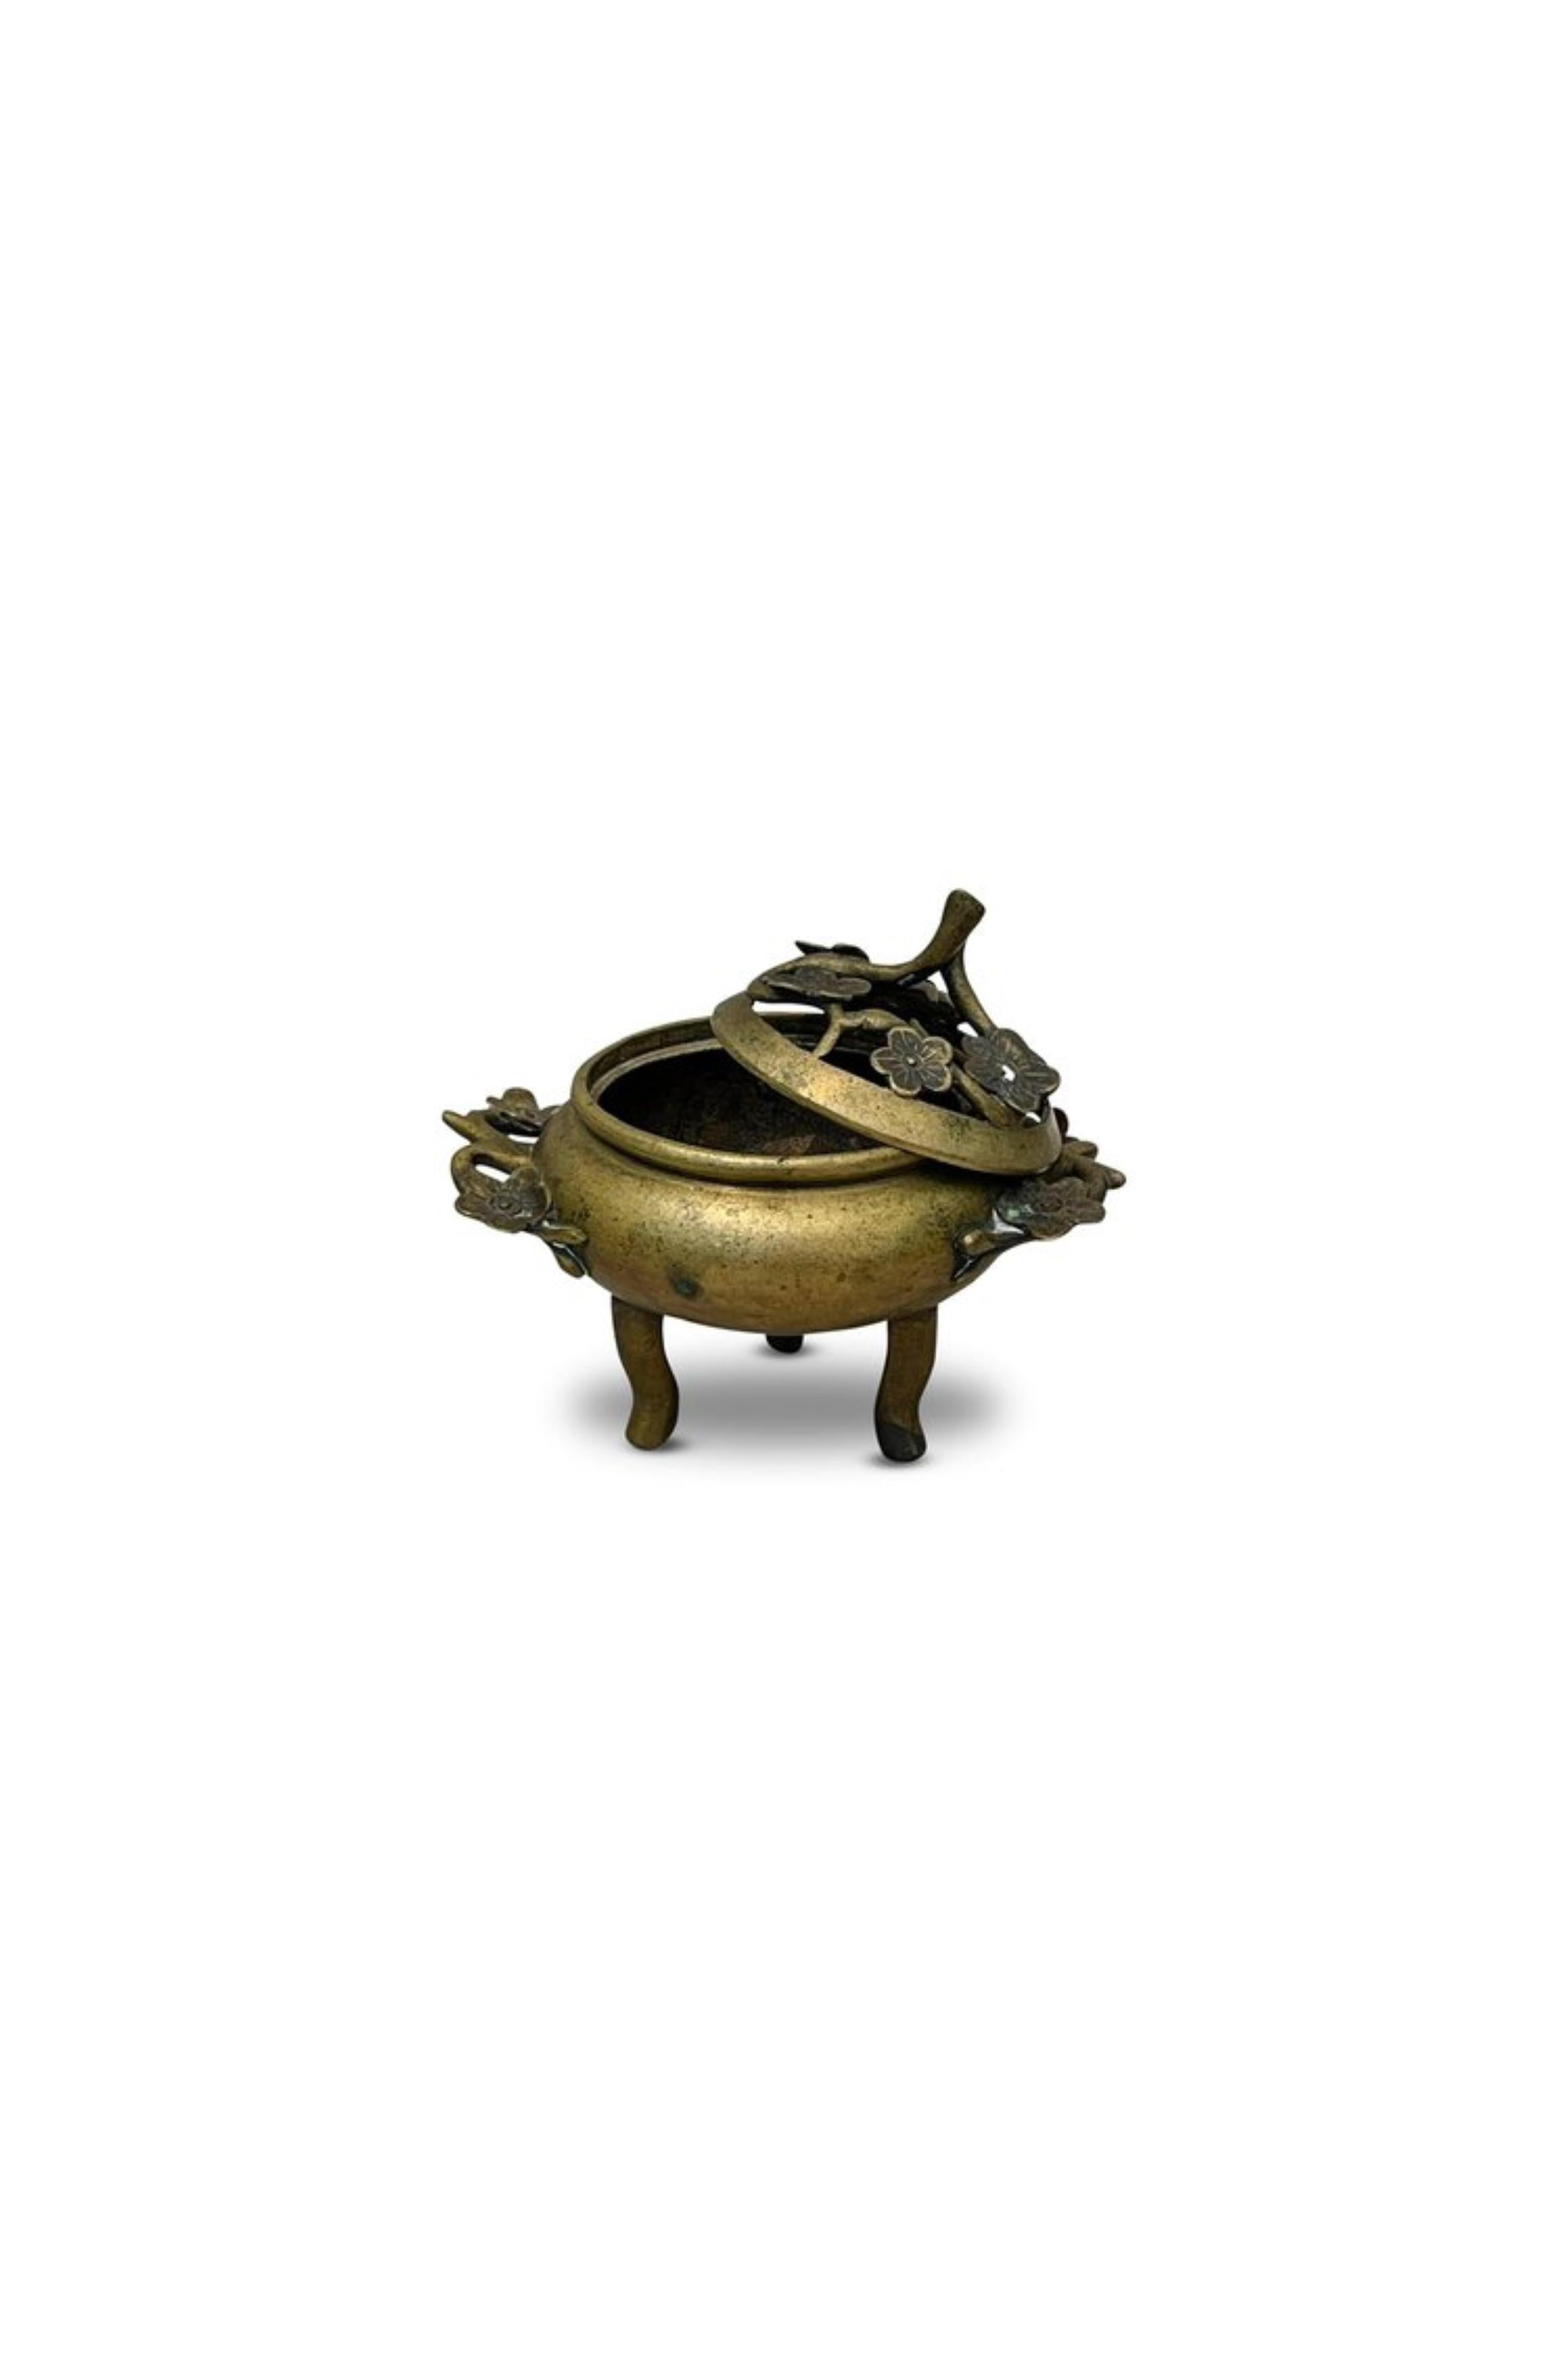 This tripod censer is an exquisite piece from the Qing Dynasty, showcasing a delicate cherry blossoms design. The censer features intricate gilt bronze craftsmanship, highlighting the elegant floral motifs that adorn its surface. Supported by three